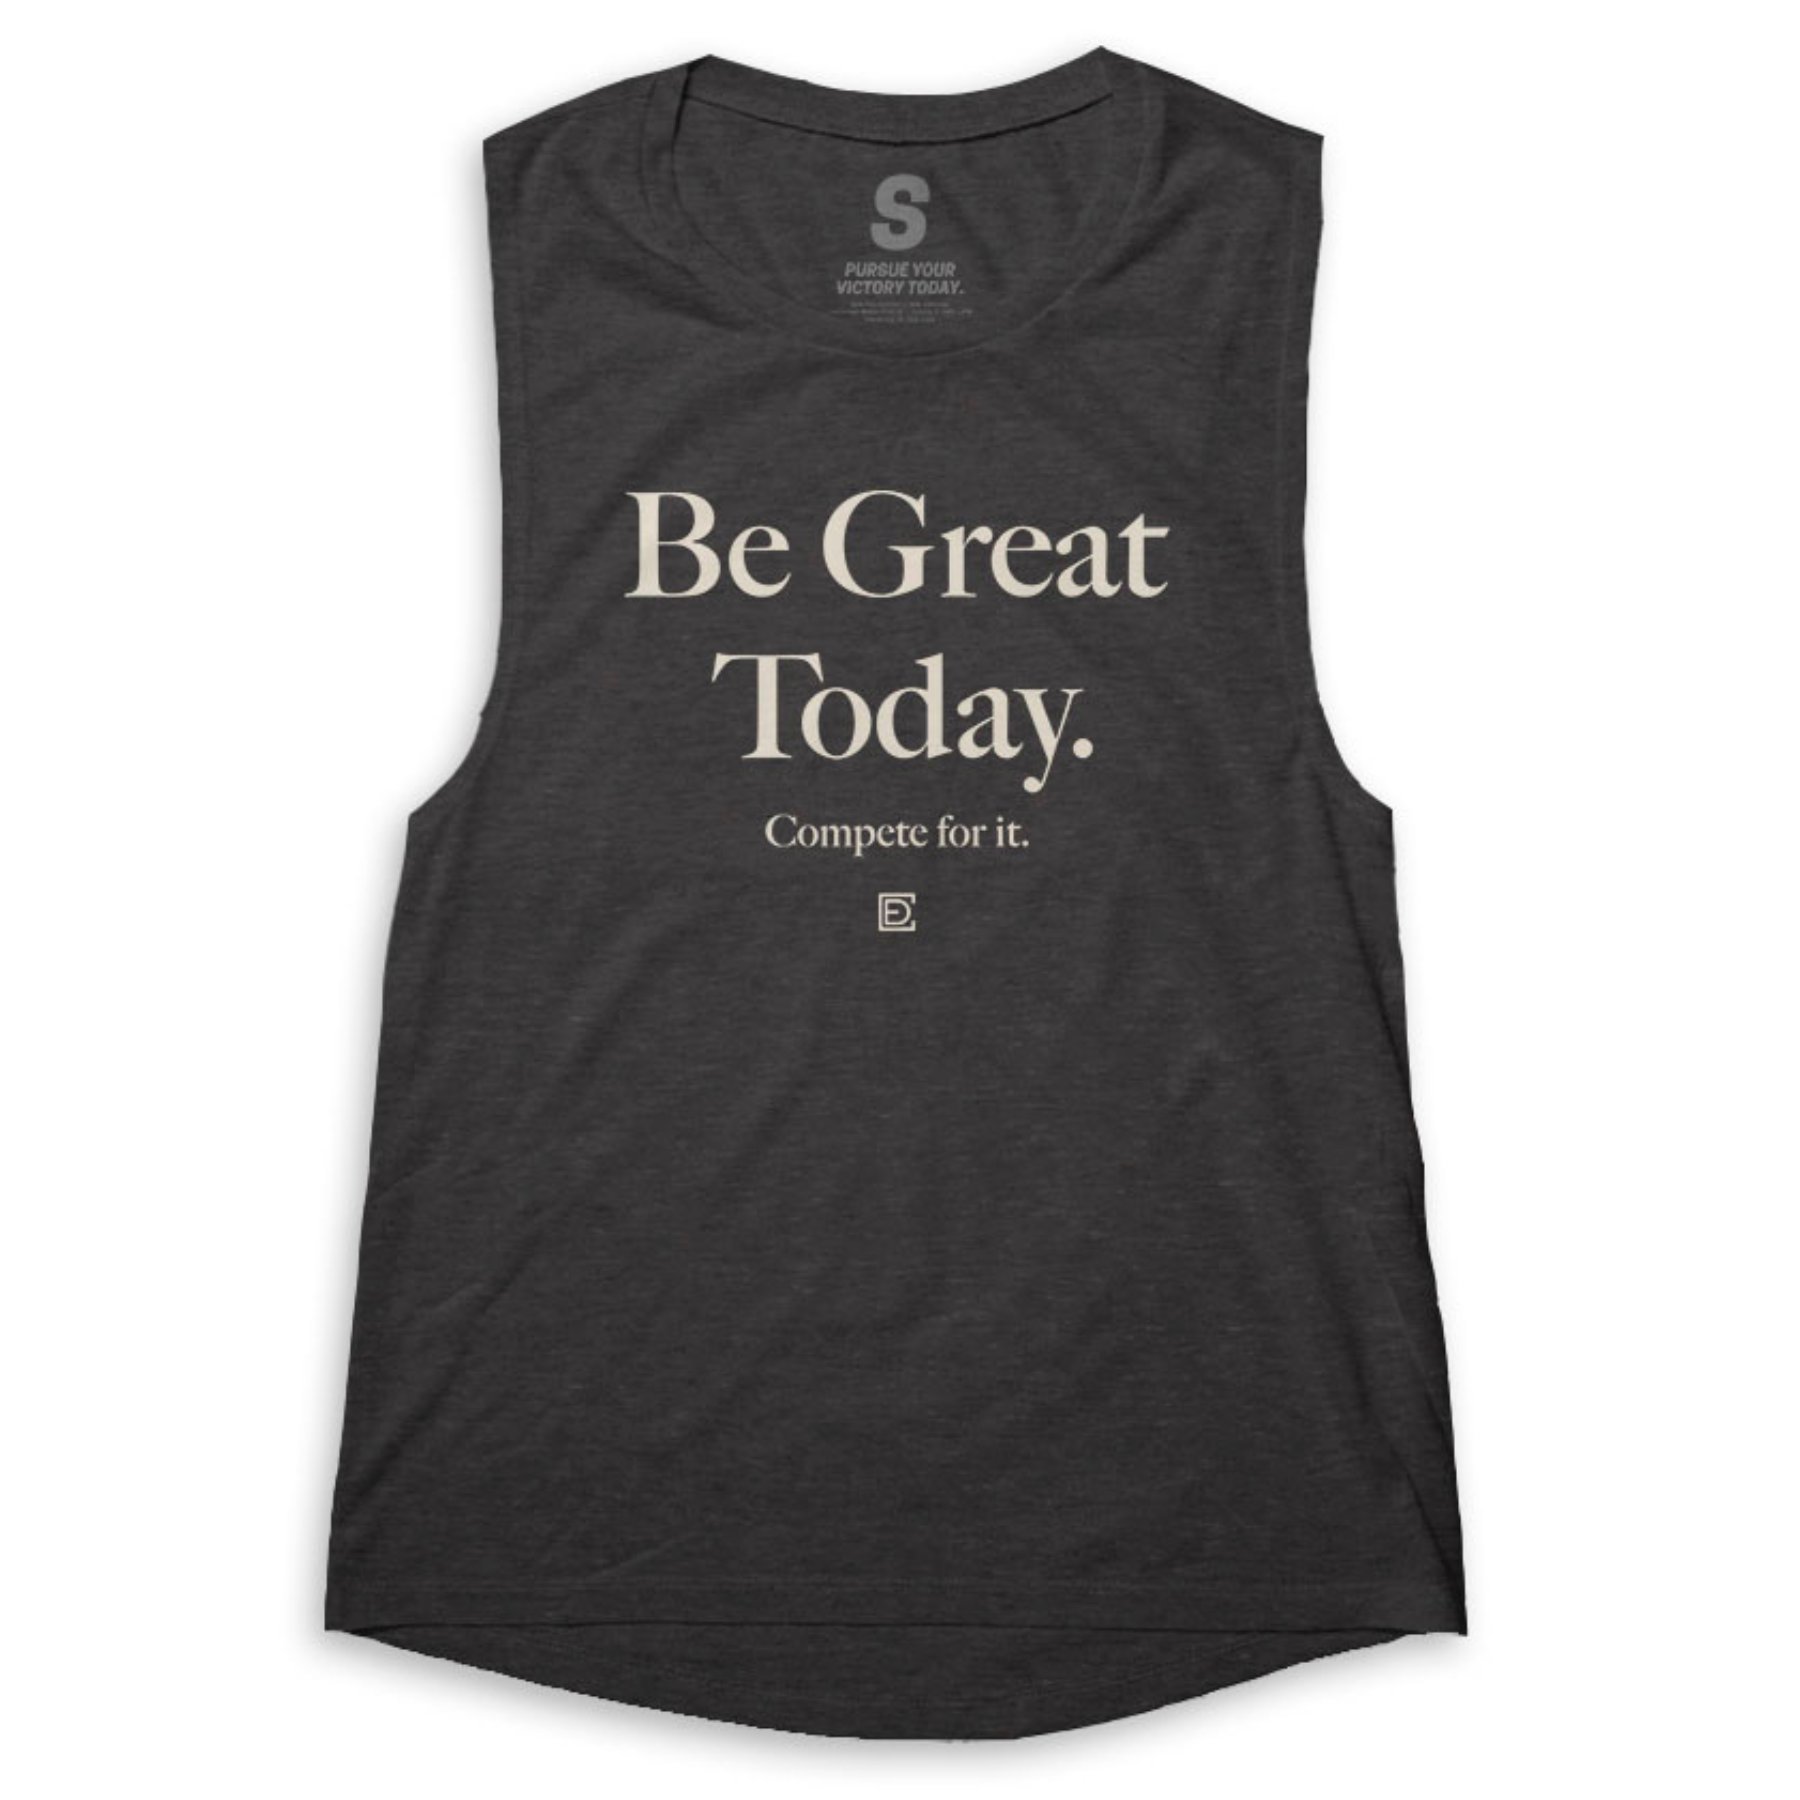 Be Great Today Women's Muscle Tank